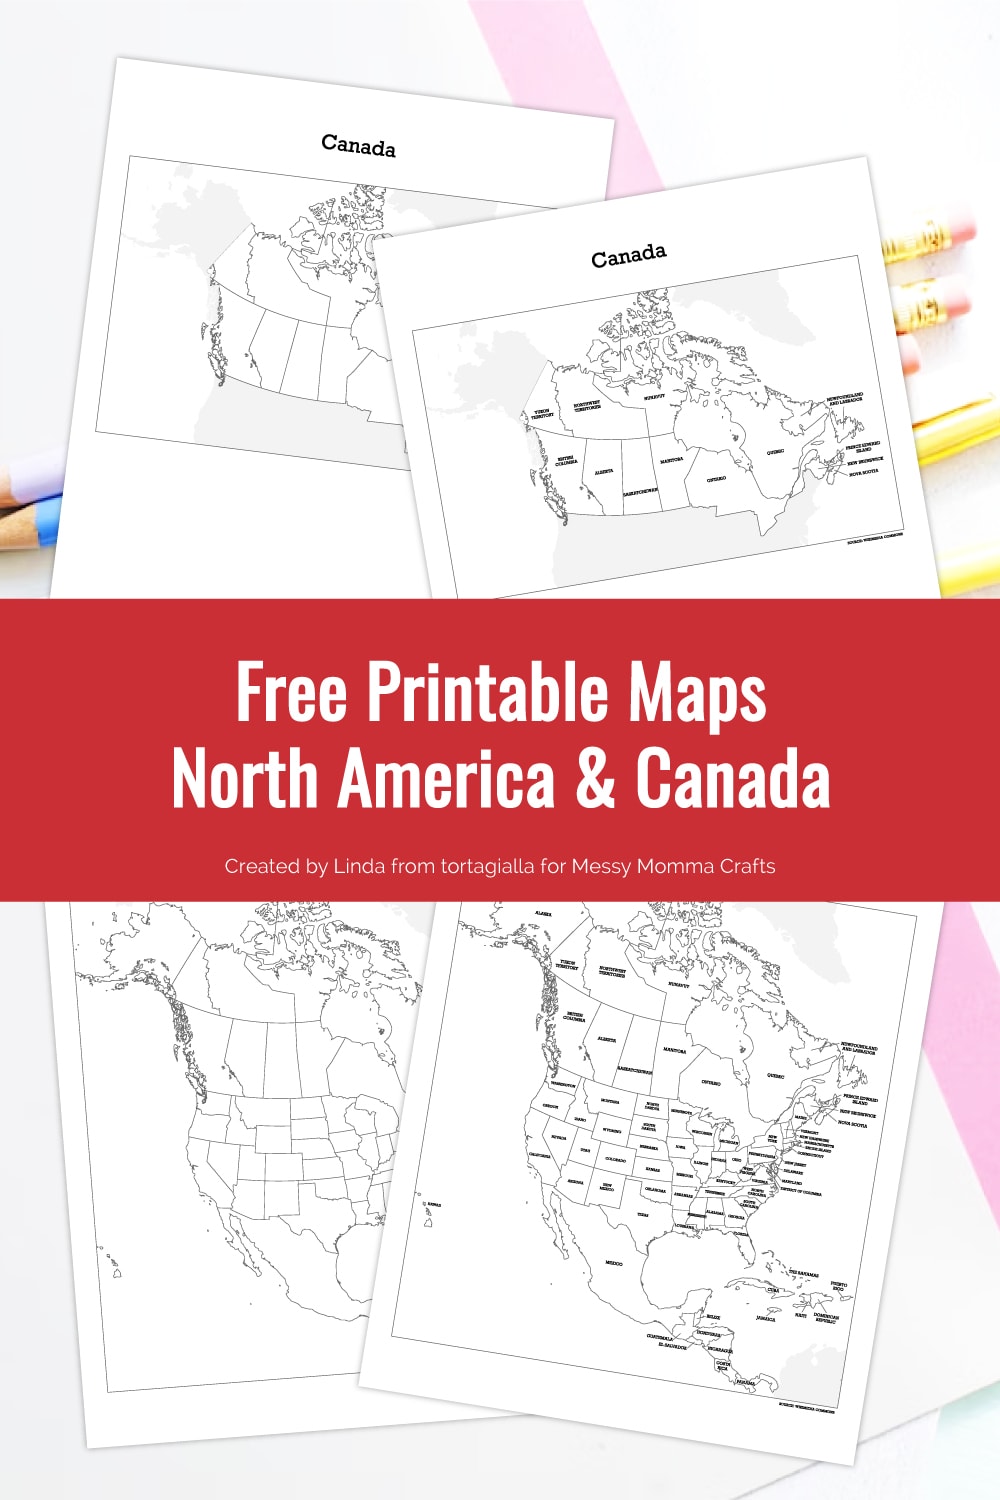 Preview of printable map pages of Canada and North America, unlabelled and labelled, on top of white desk with pencils in multiple colors. 